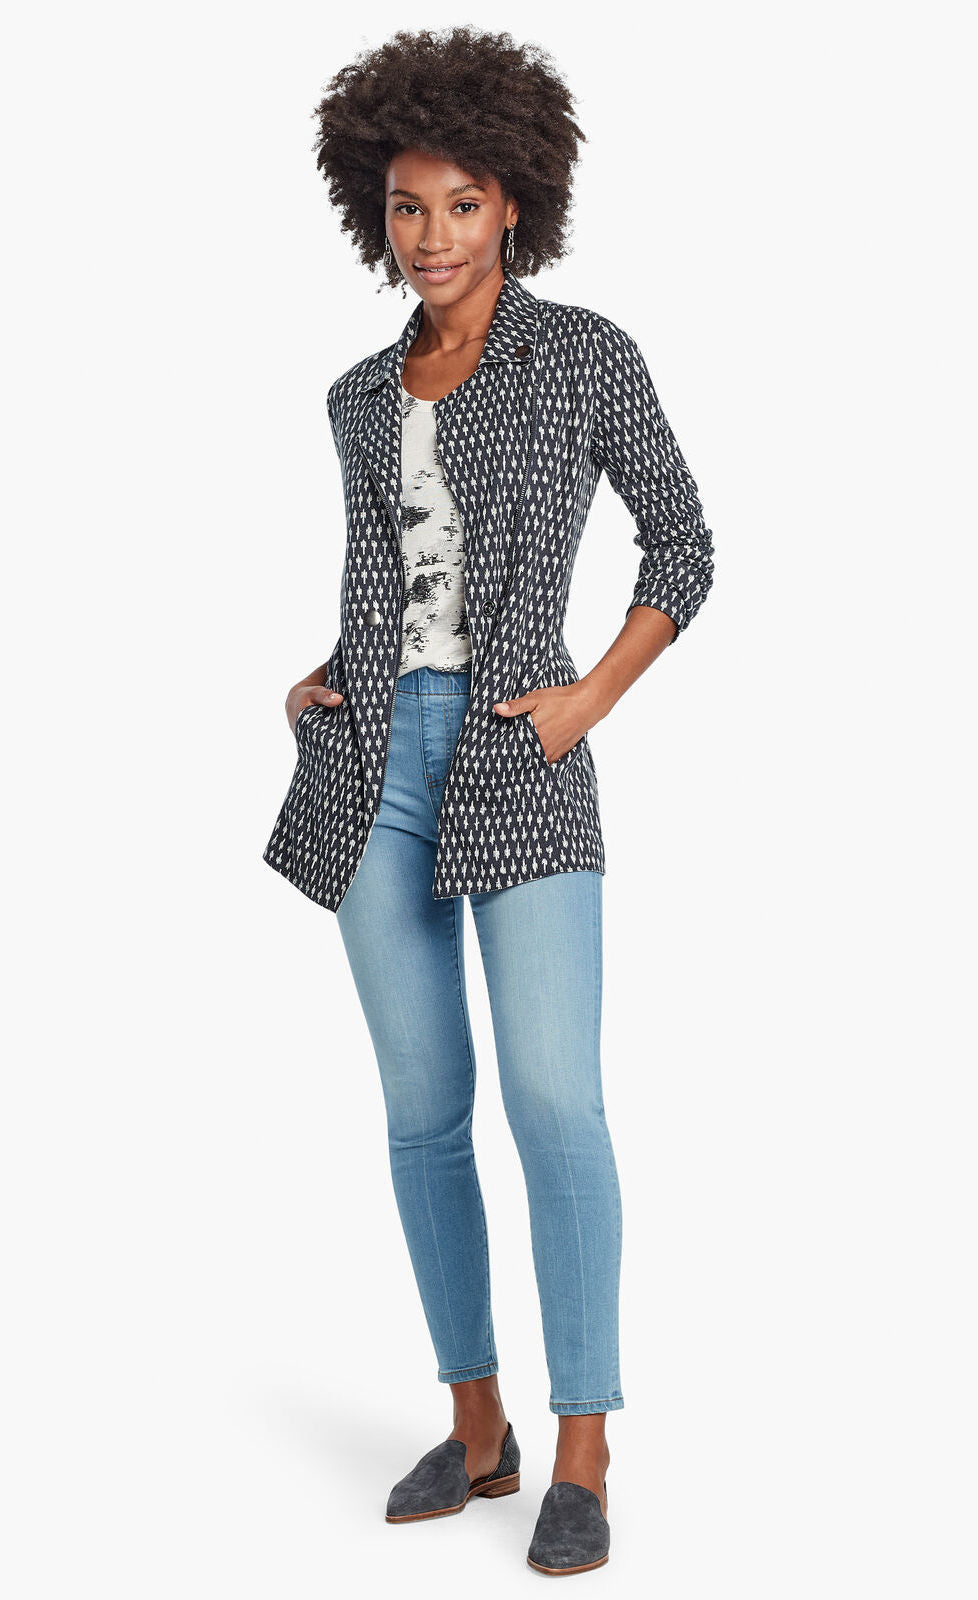 Front, full body view of a woman wearing the Nic + Zoe Ponte Ikat Jacket over a white printed top and with fitted jeans. The jacket is indigo with a white speck print all over it. It has a flat, notched lapel, and a front, off-center zipper.